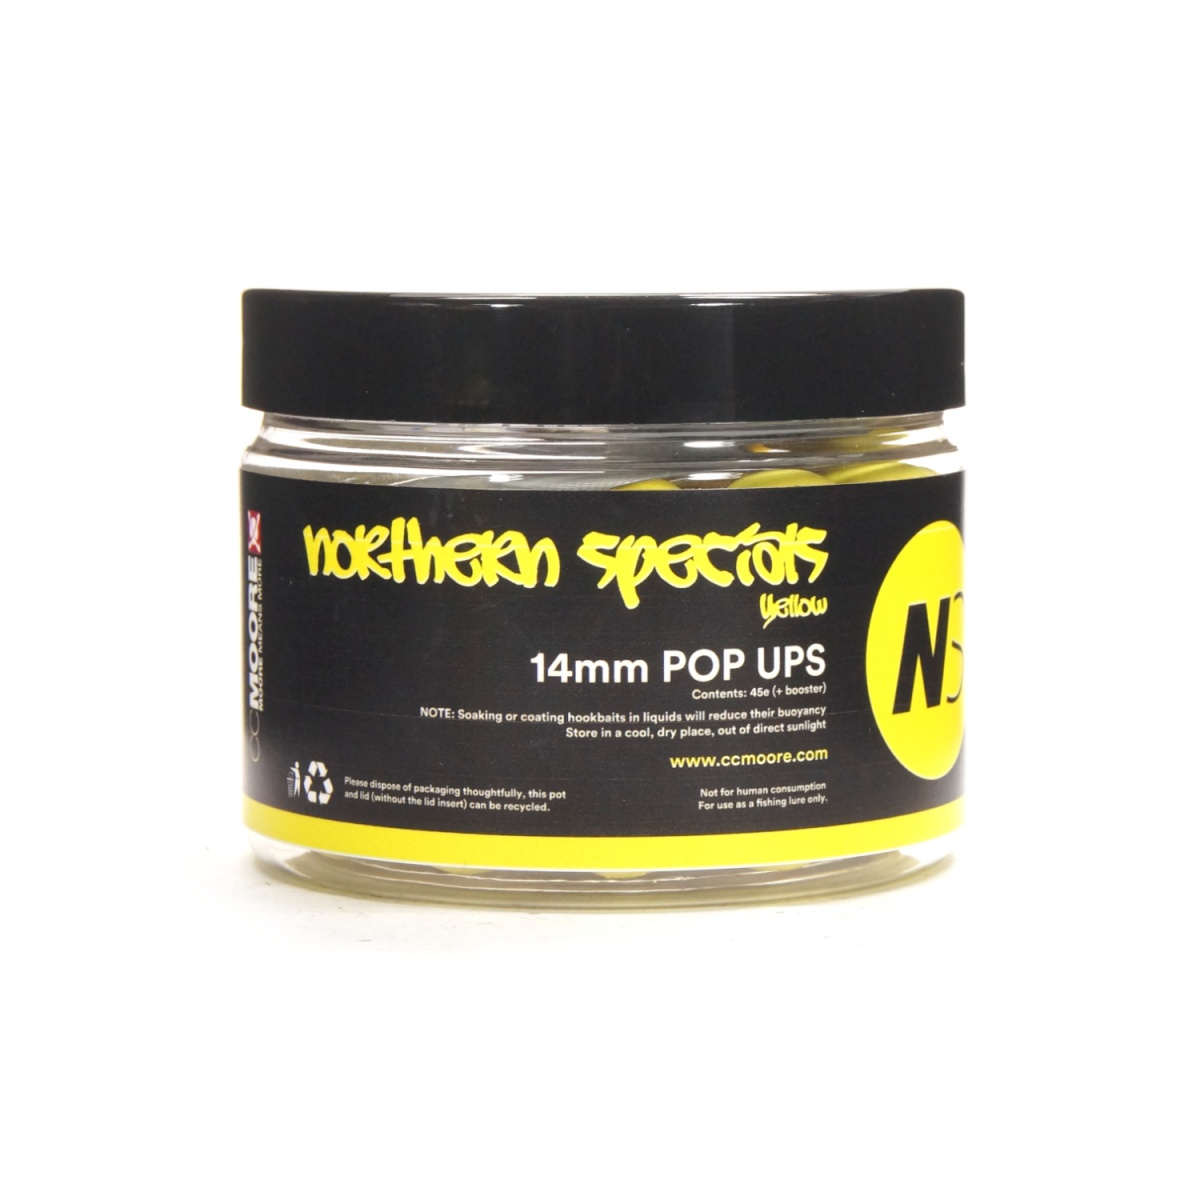 CcMoore Northern Special NS1 Yellow Pop Ups 14 mm rozmiar